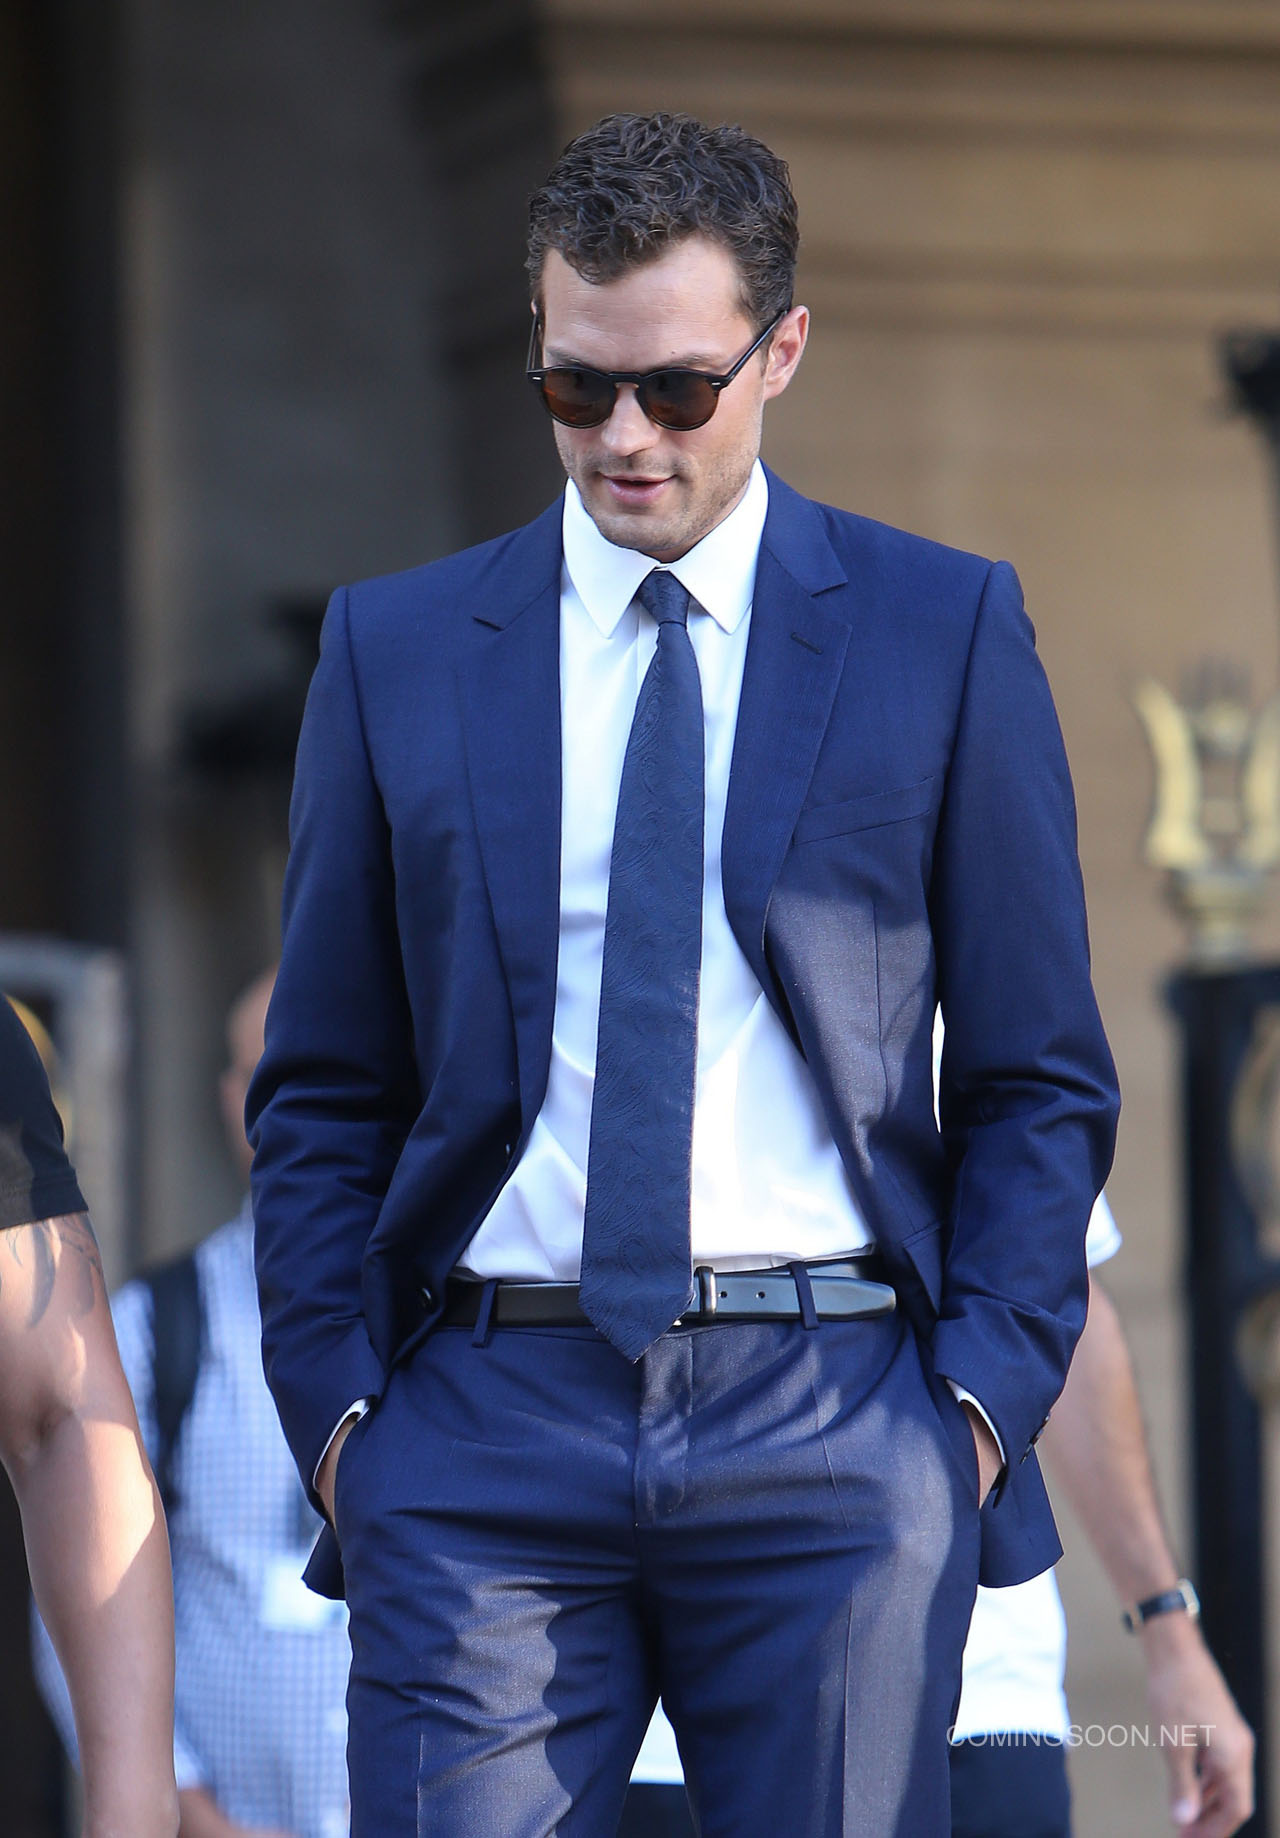 Filming on 'Fifty Shades Darker' takes place at Opera Garnier in Paris Featuring: Jamie Dornan Where: Paris, France When: 18 Jul 2016 Credit: WENN.com **Not available for publication in France, Belgium, Spain, Italy**